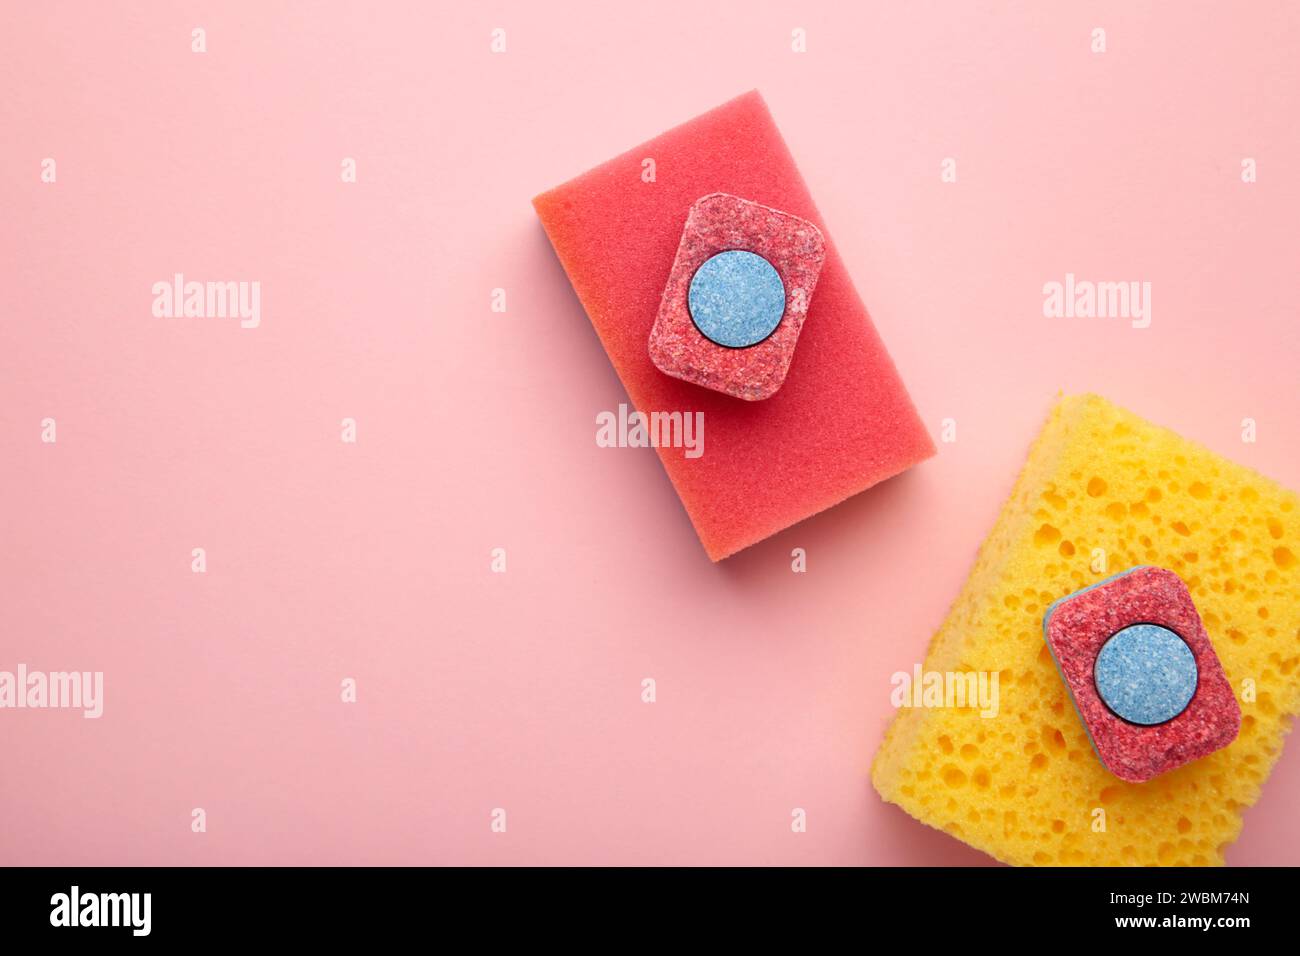 Dishwasher tablets on a dishwashing sponges on a pink background, dishwashing products. Top view Stock Photo